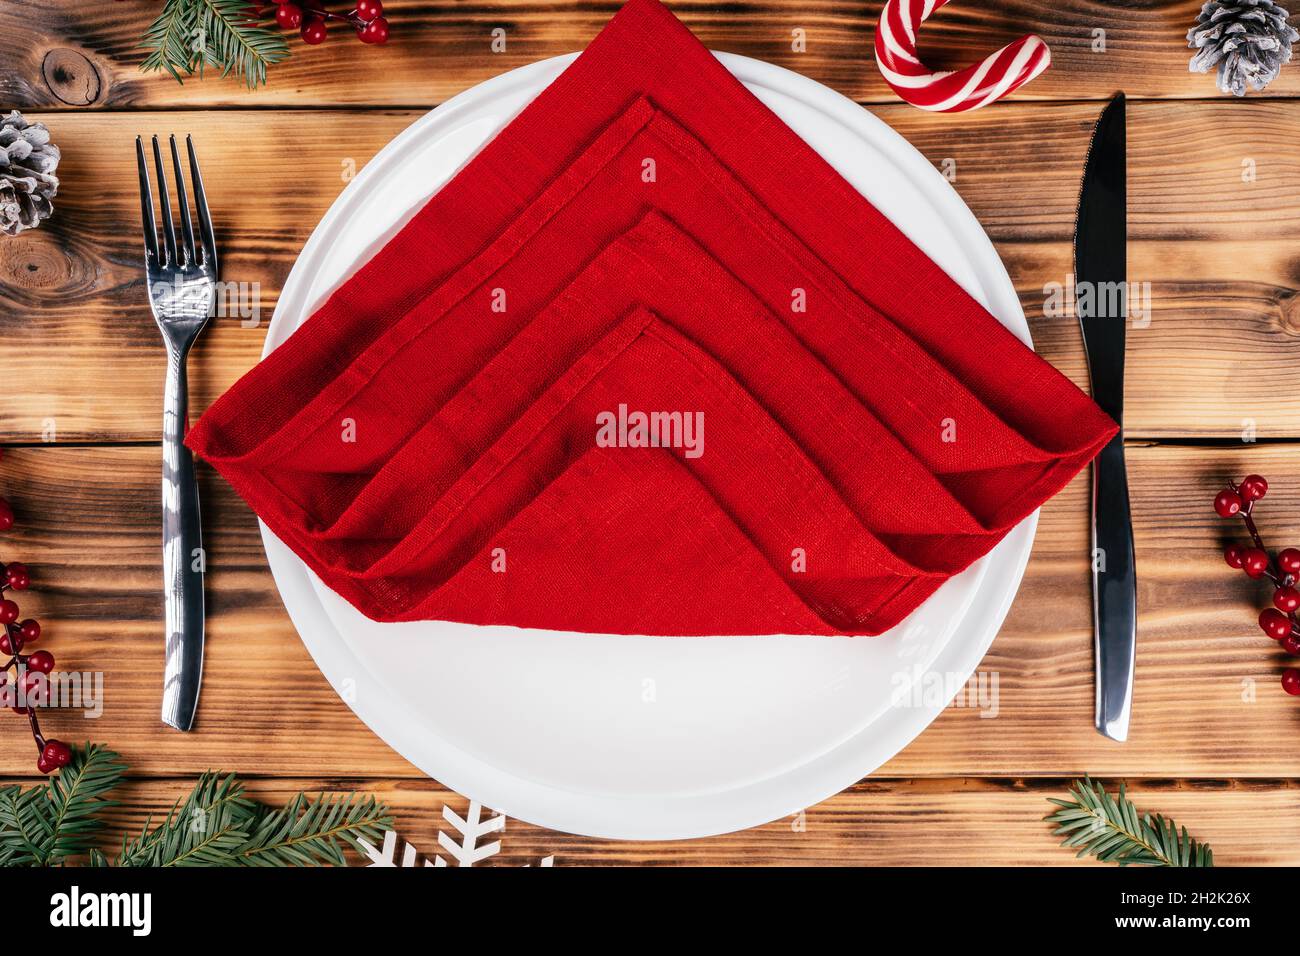 https://c8.alamy.com/comp/2H2K26X/step-by-step-tutorial-fold-linen-napkin-in-shape-of-christmas-tree-new-year-table-setting-step-3-same-way-set-all-four-layers-of-napkin-aside-di-2H2K26X.jpg